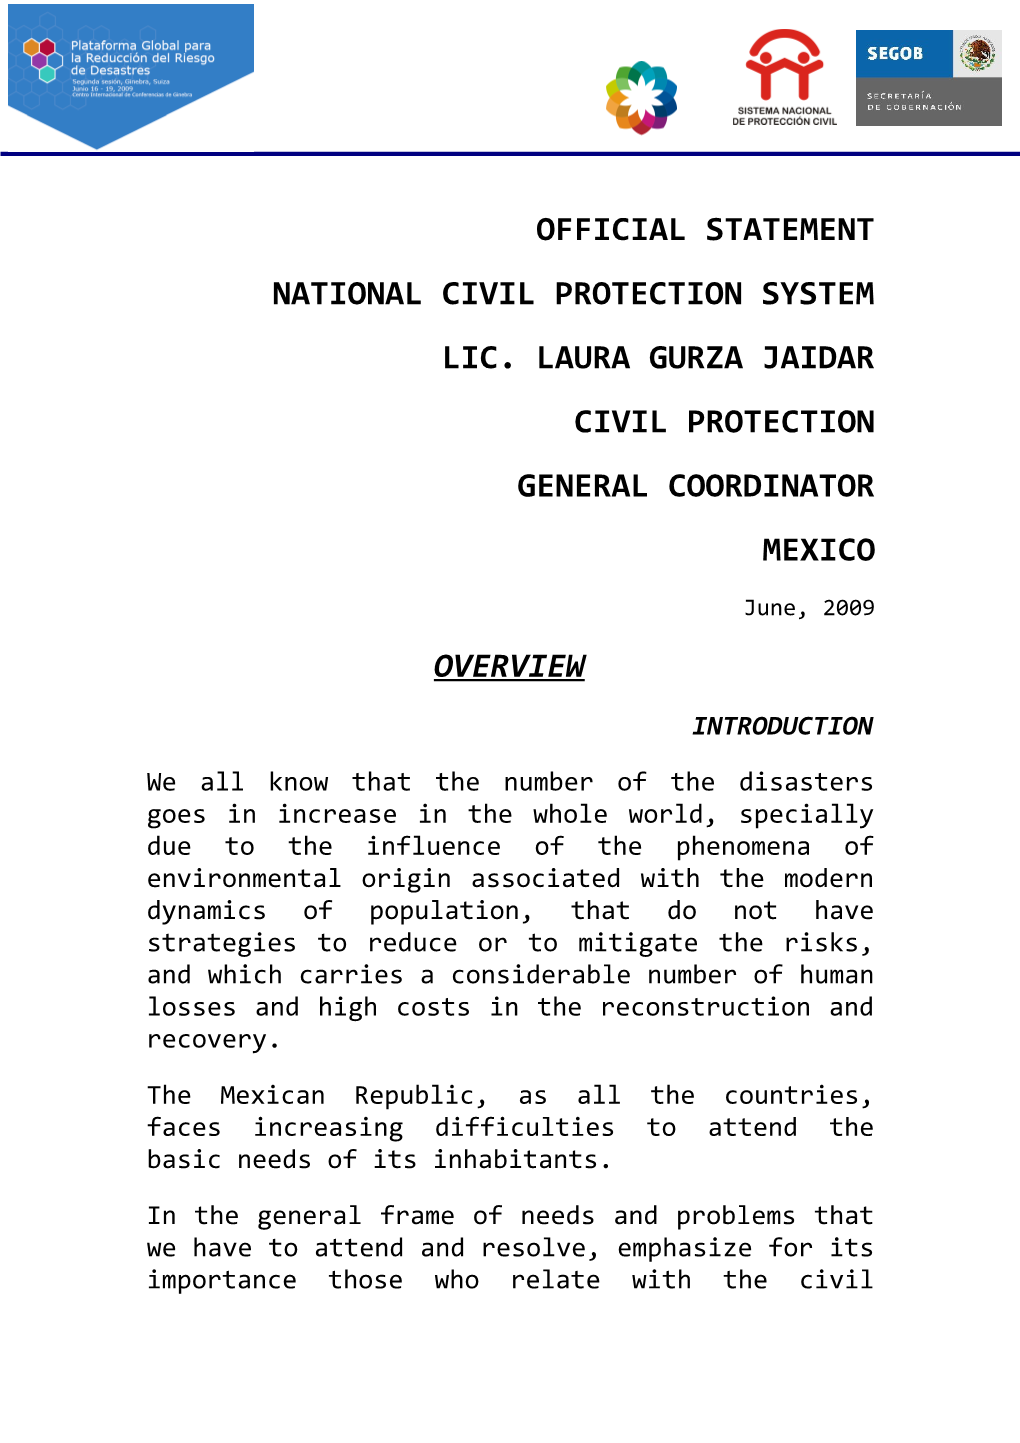 National Civil Protection System